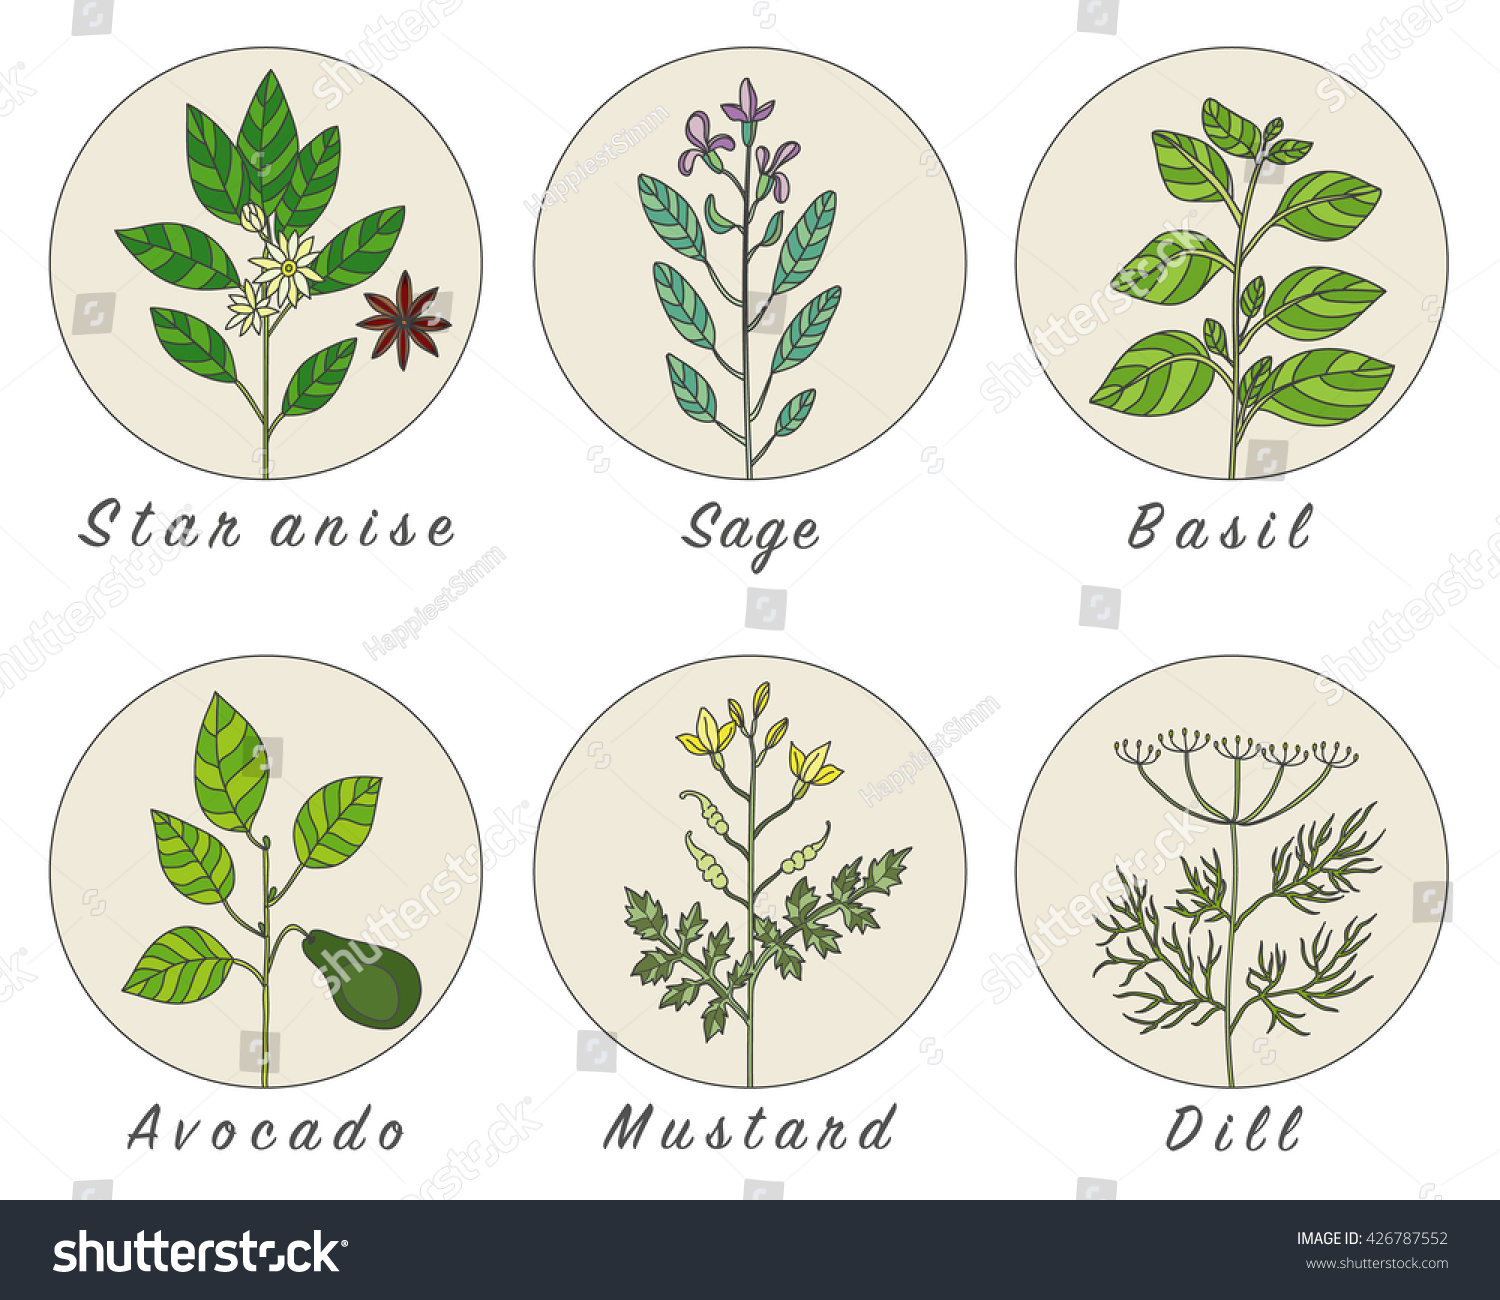 Set of spices, medicinal herbs and officinale healing plants icons. Hand drawn illustrations. Botanic sketches. #426787552